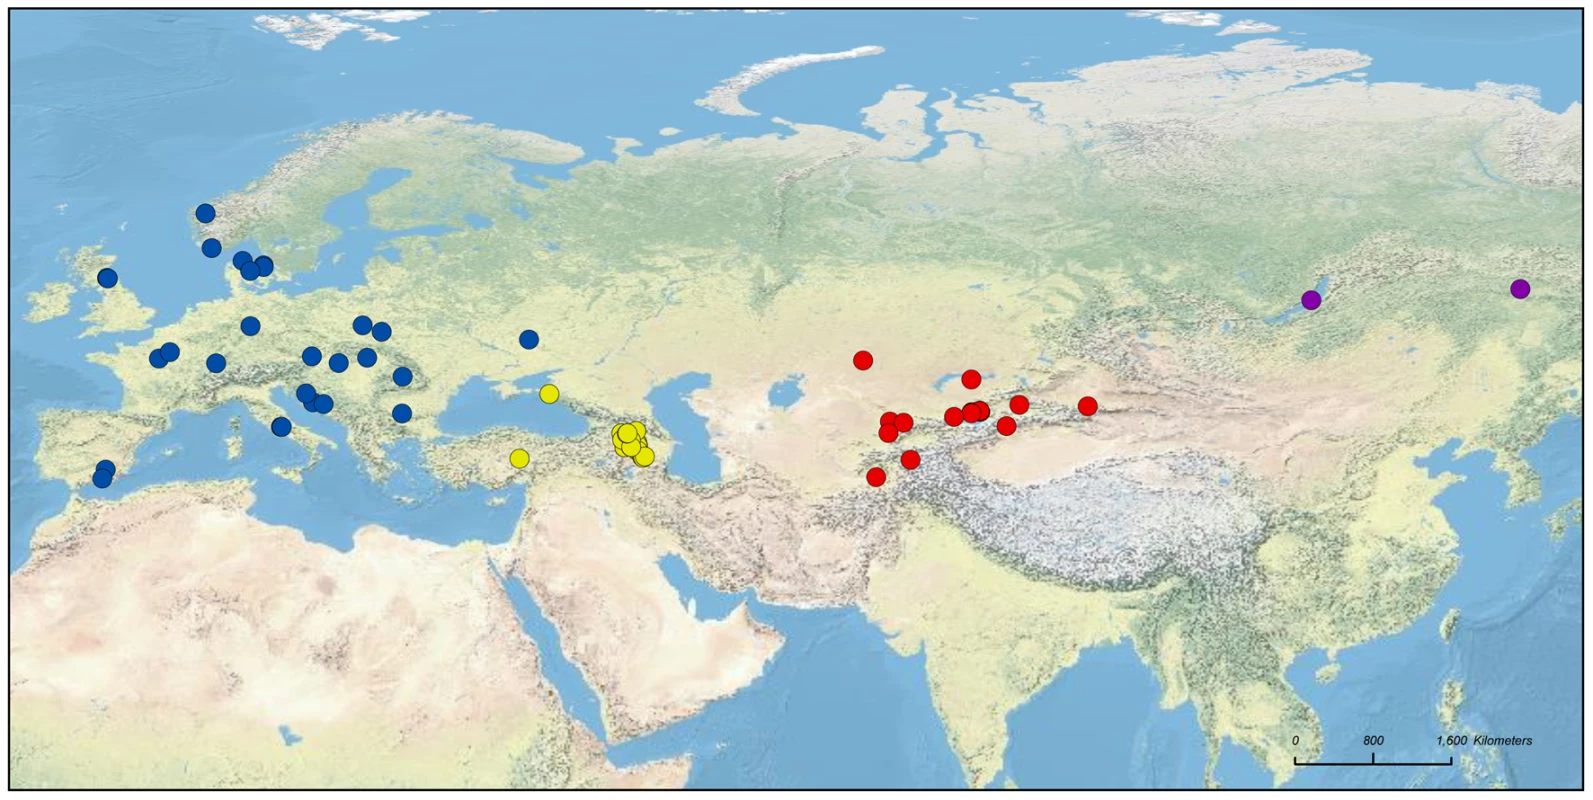 Geographic origins of the samples of the four wild <i>Malus</i> species used: <i>M. sylvestris</i> (blue), <i>M. orientalis</i> (yellow), <i>M. baccata</i> (purple), and <i>M. sieversii</i> (red).